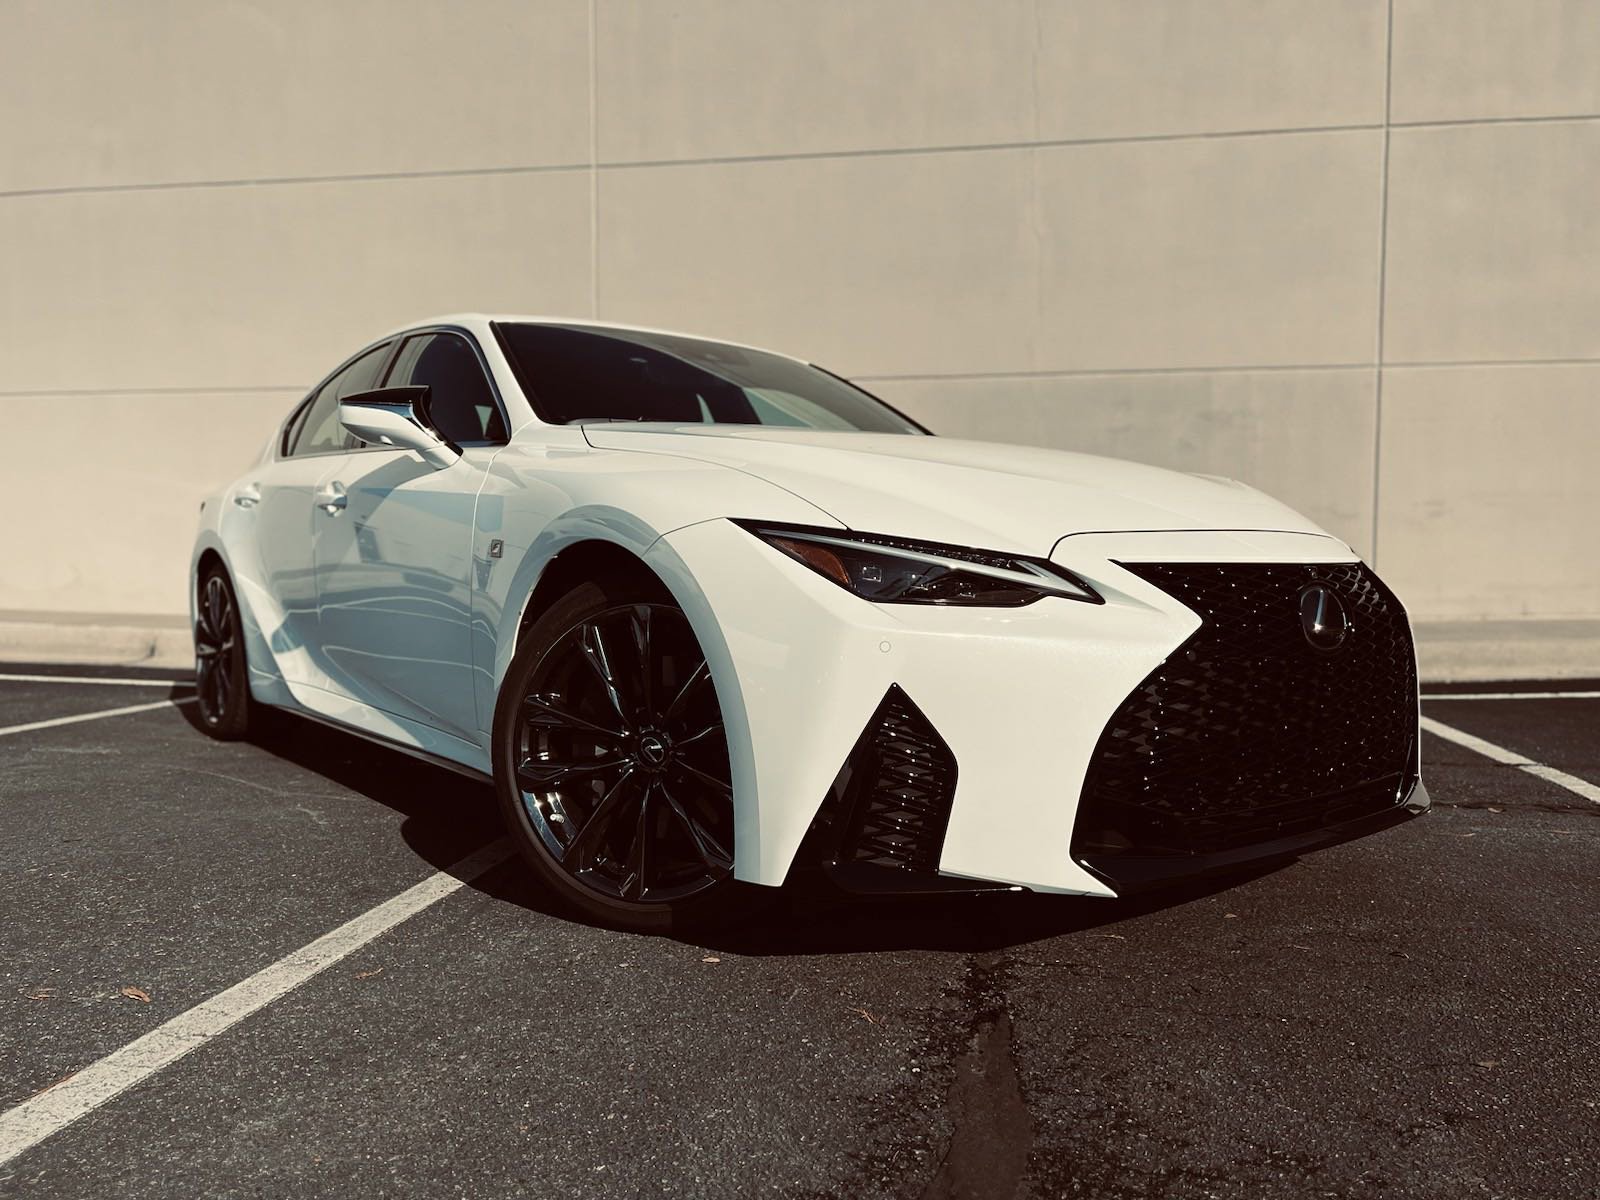 Pre-Owned 2022 Lexus IS 350 F SPORT Sedan in Cary #SA5066 | Hendrick  Chevrolet Cary